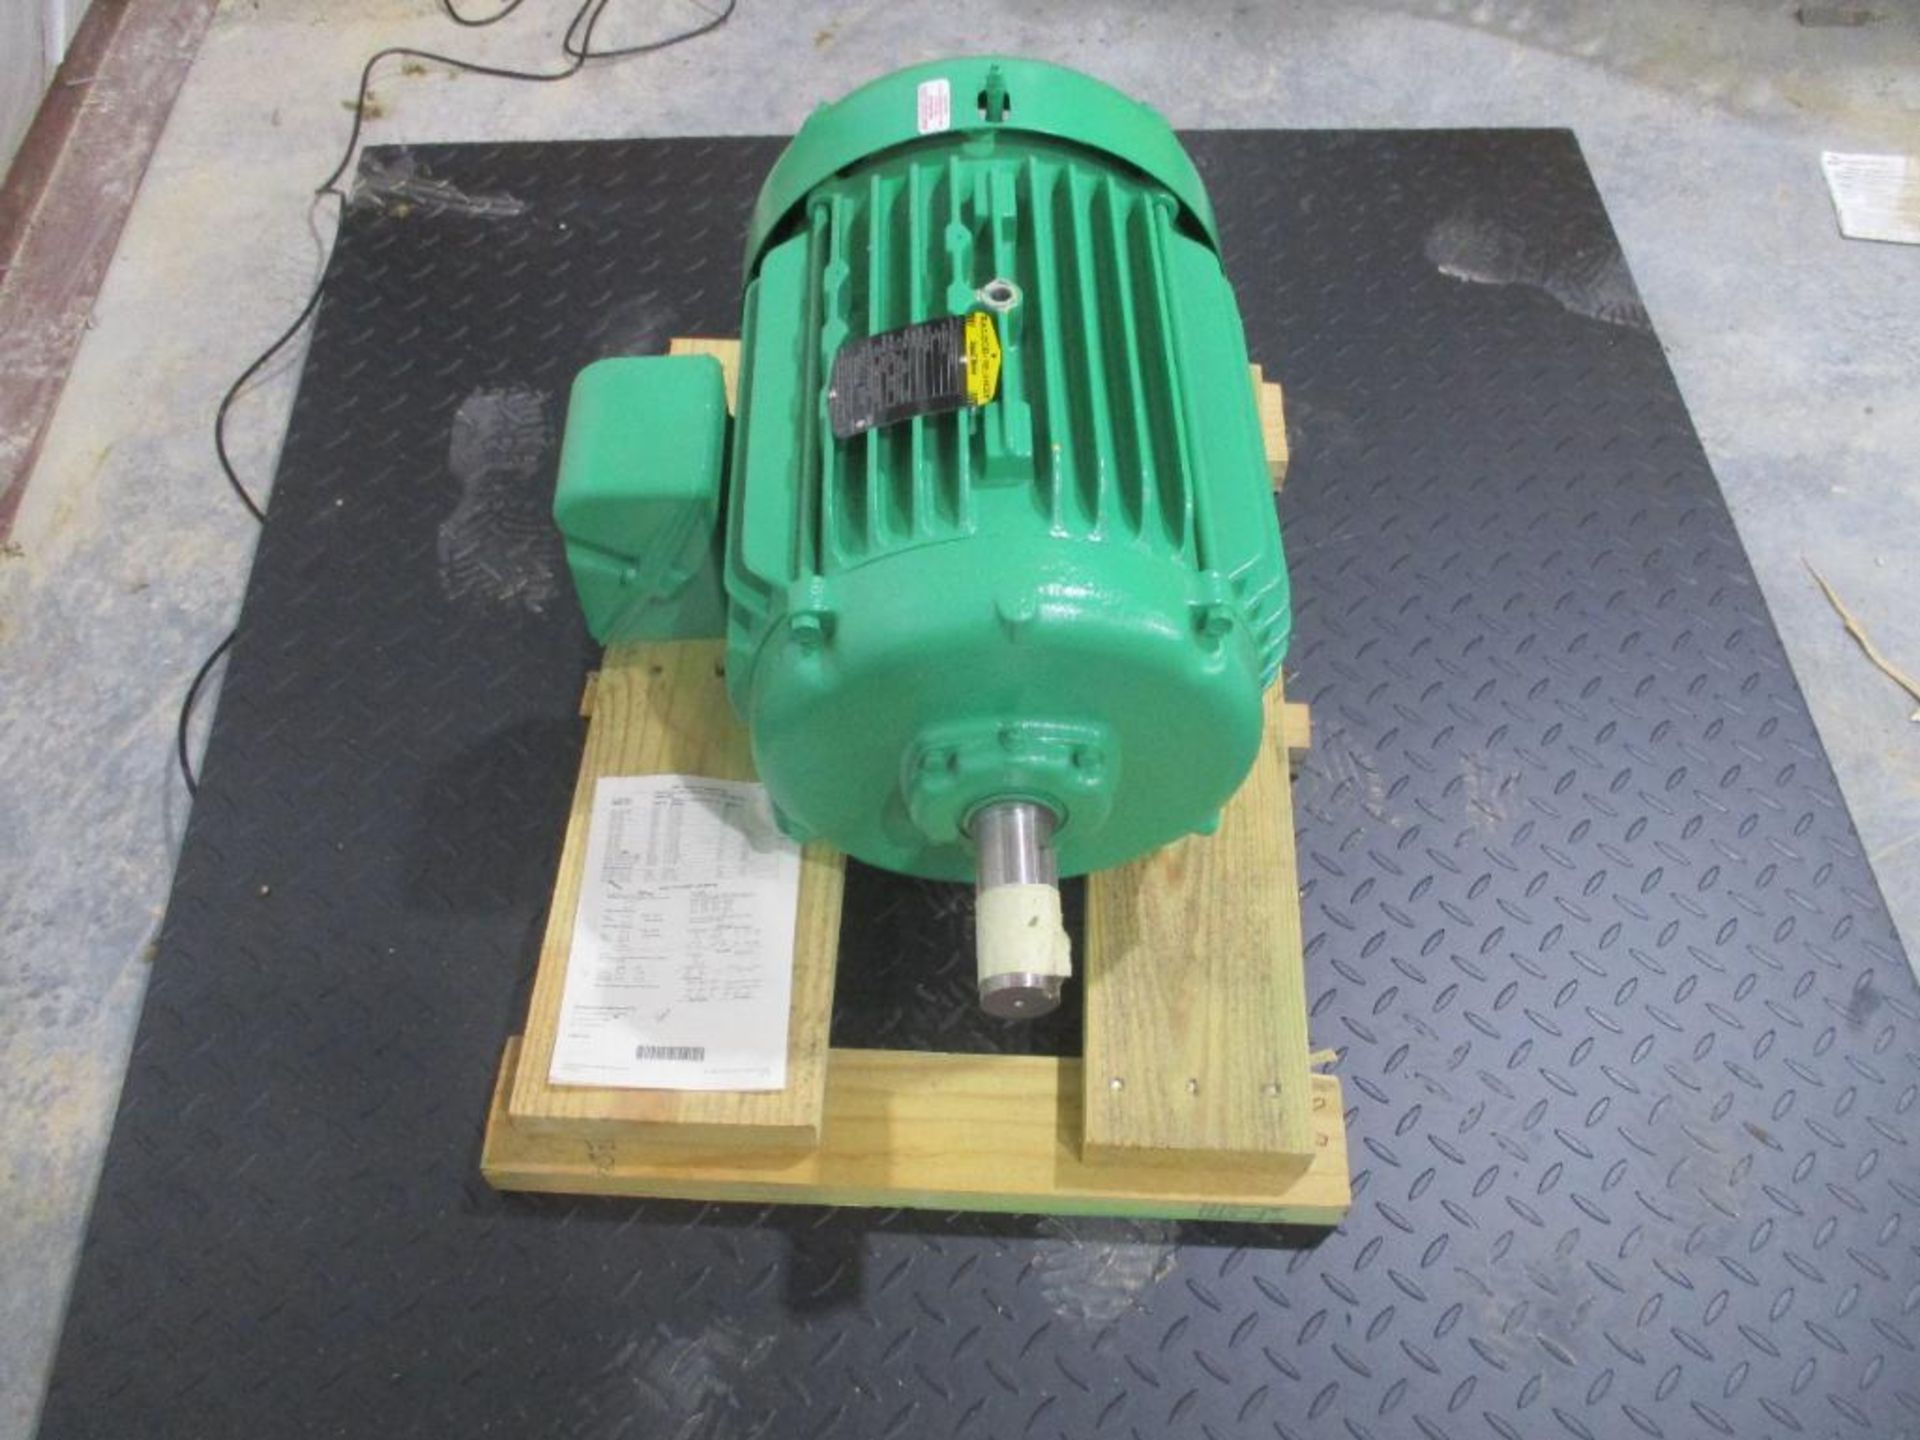 BALDOR 3 PHASE 20HP 3520RPM 256T FRAME A/C MOTOR P/N 1208027540-000010, 245# lbs (There will be a $4 - Image 2 of 6